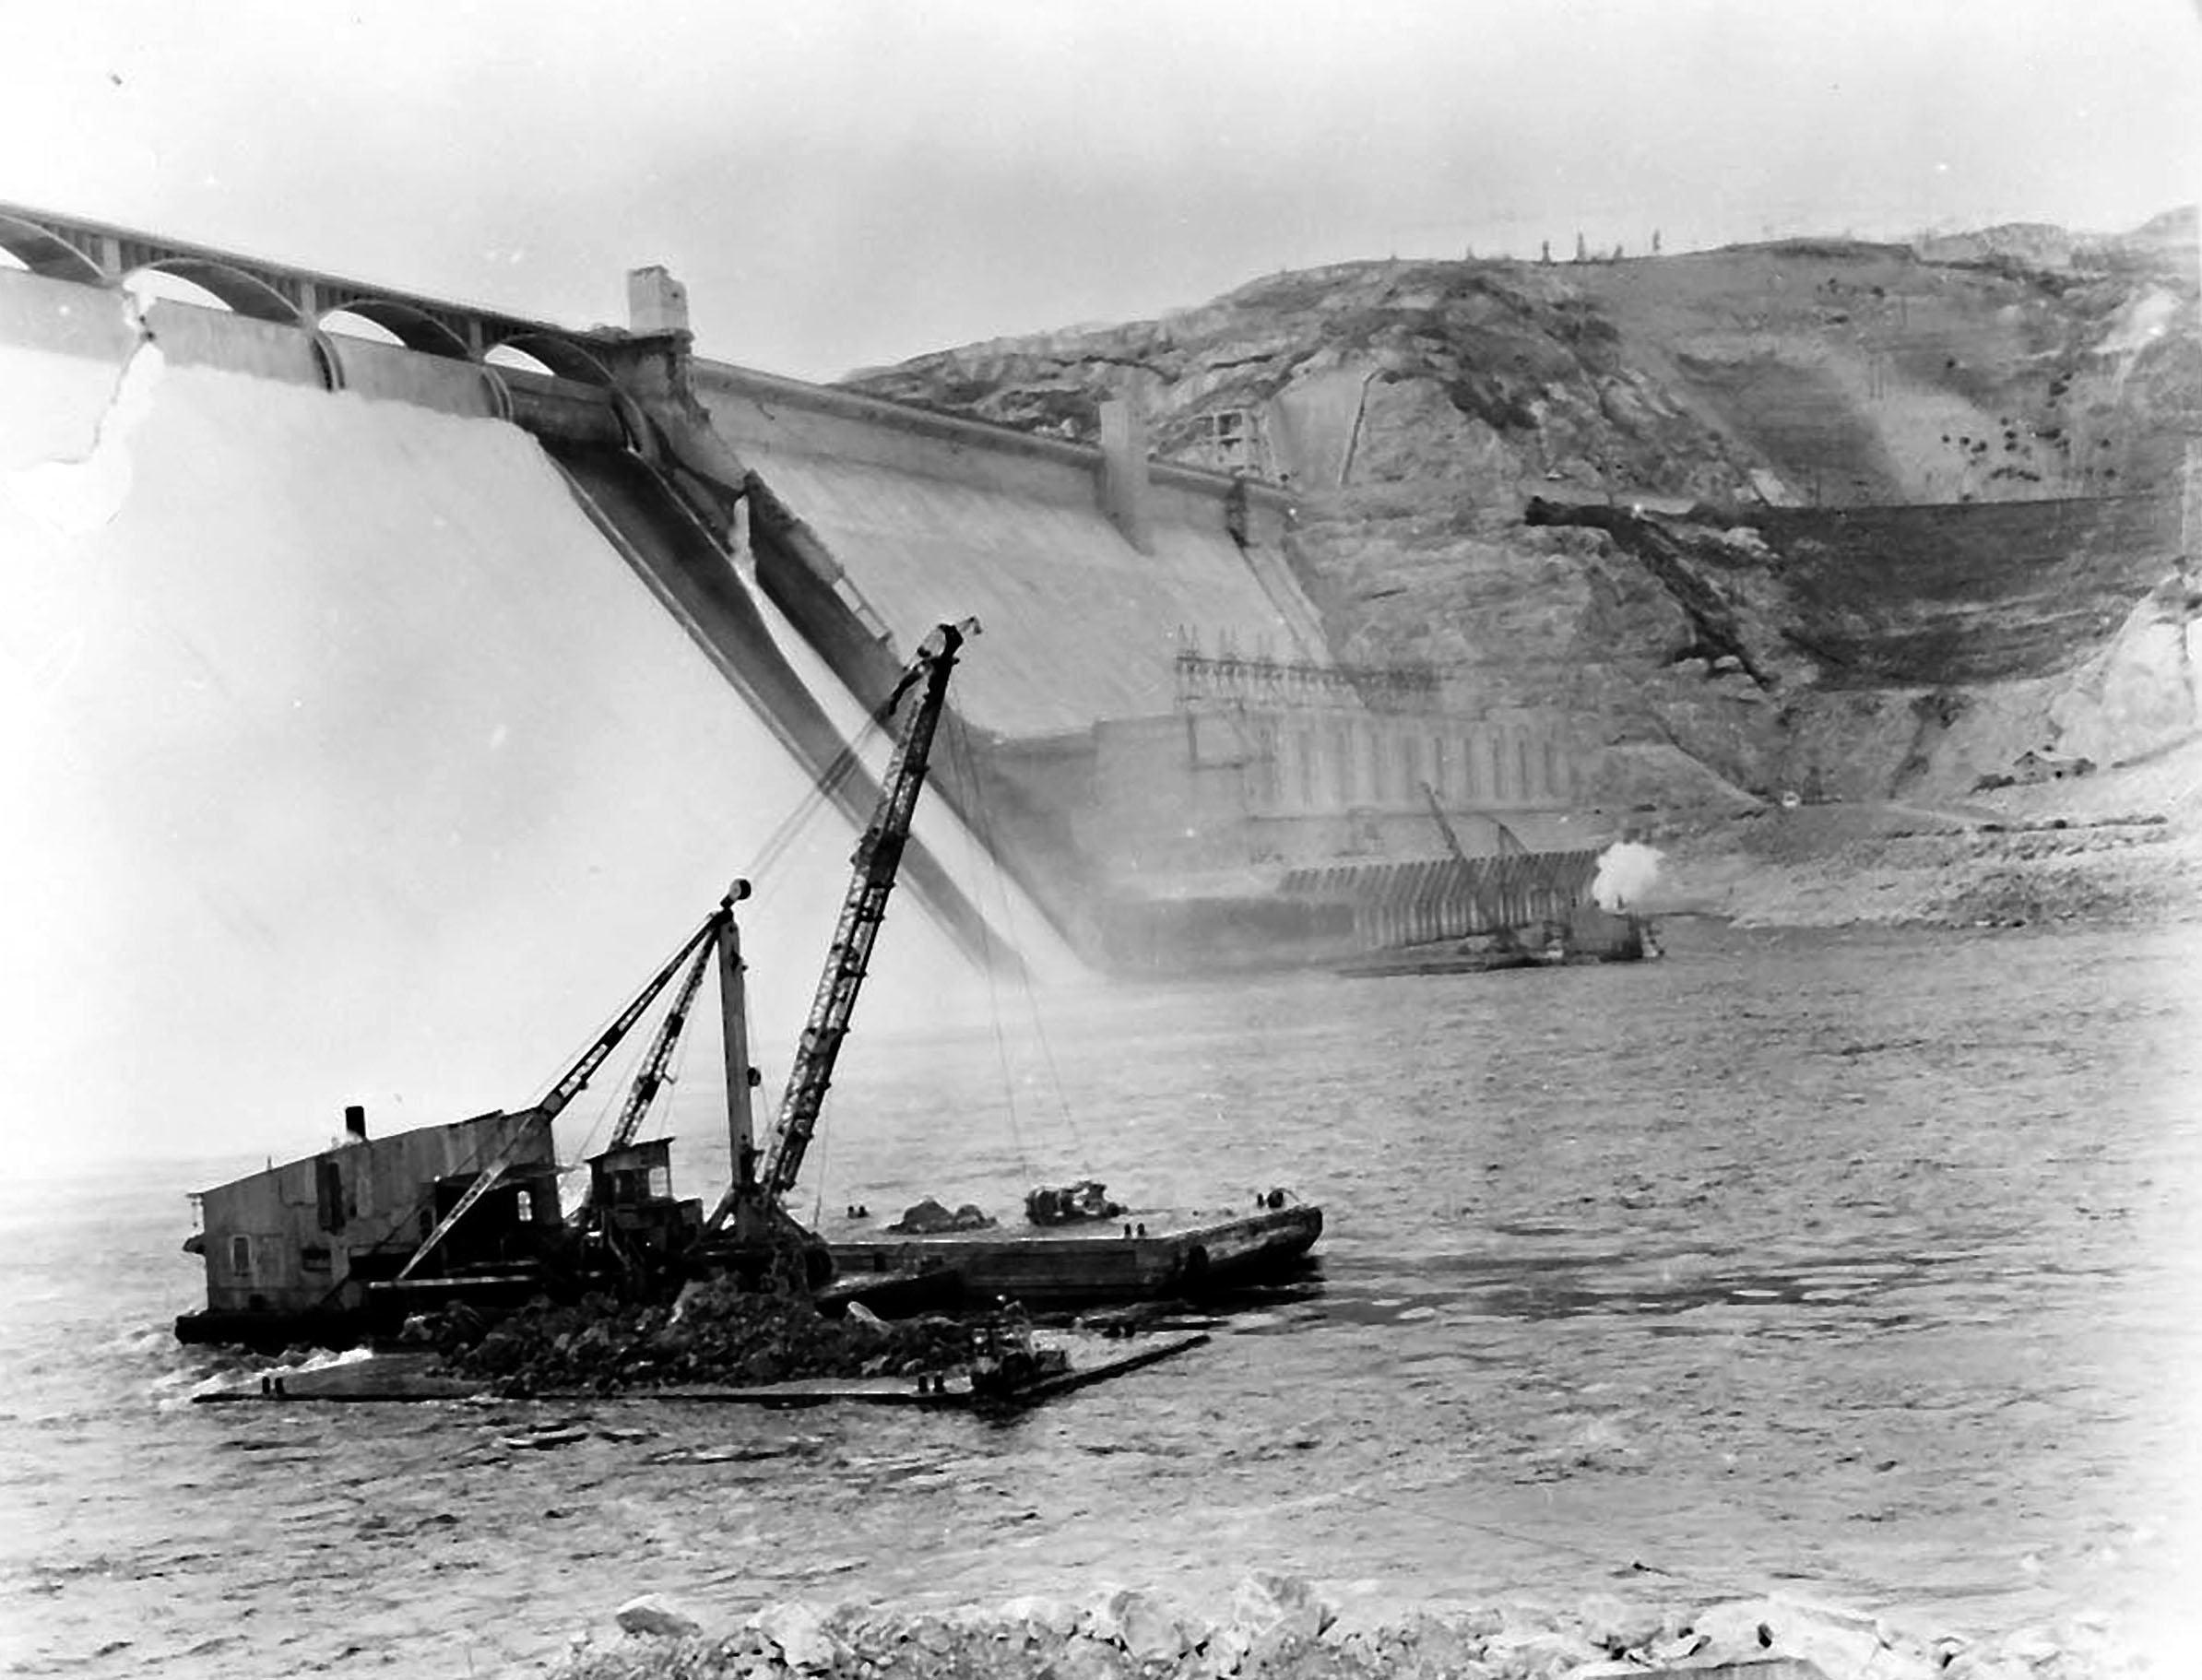 January 27, 1947. Excavating river bottom prior to setting up caison for spillway bucket repairs at Grand Coulee Dam.